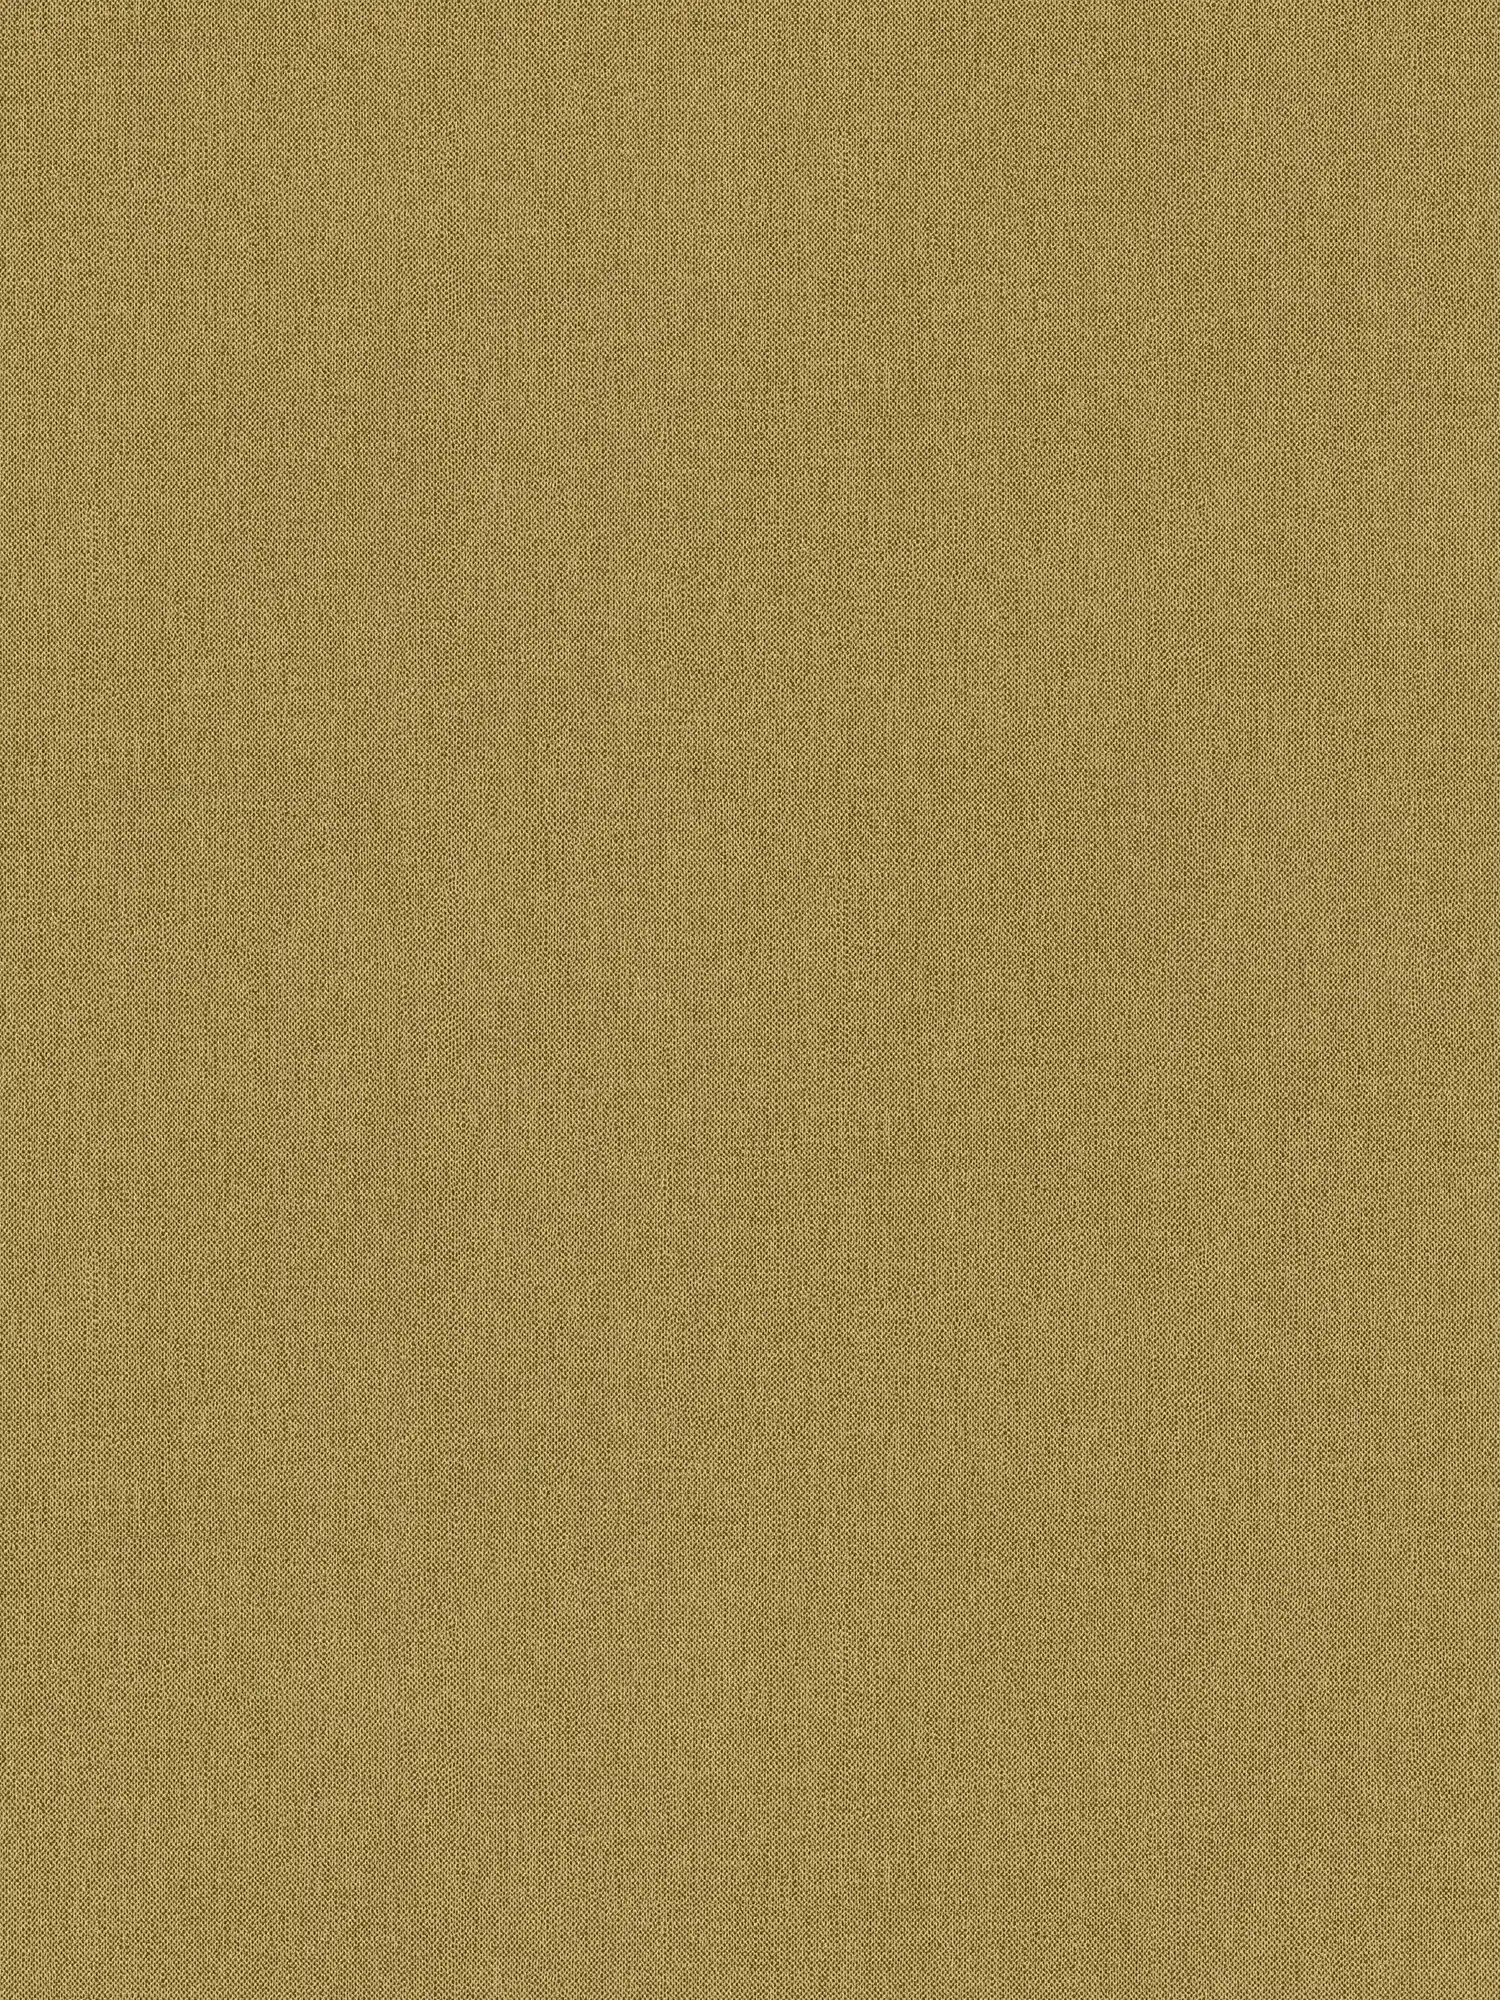 wallpaper ocher yellow mottled with fabric structure - yellow, brown
